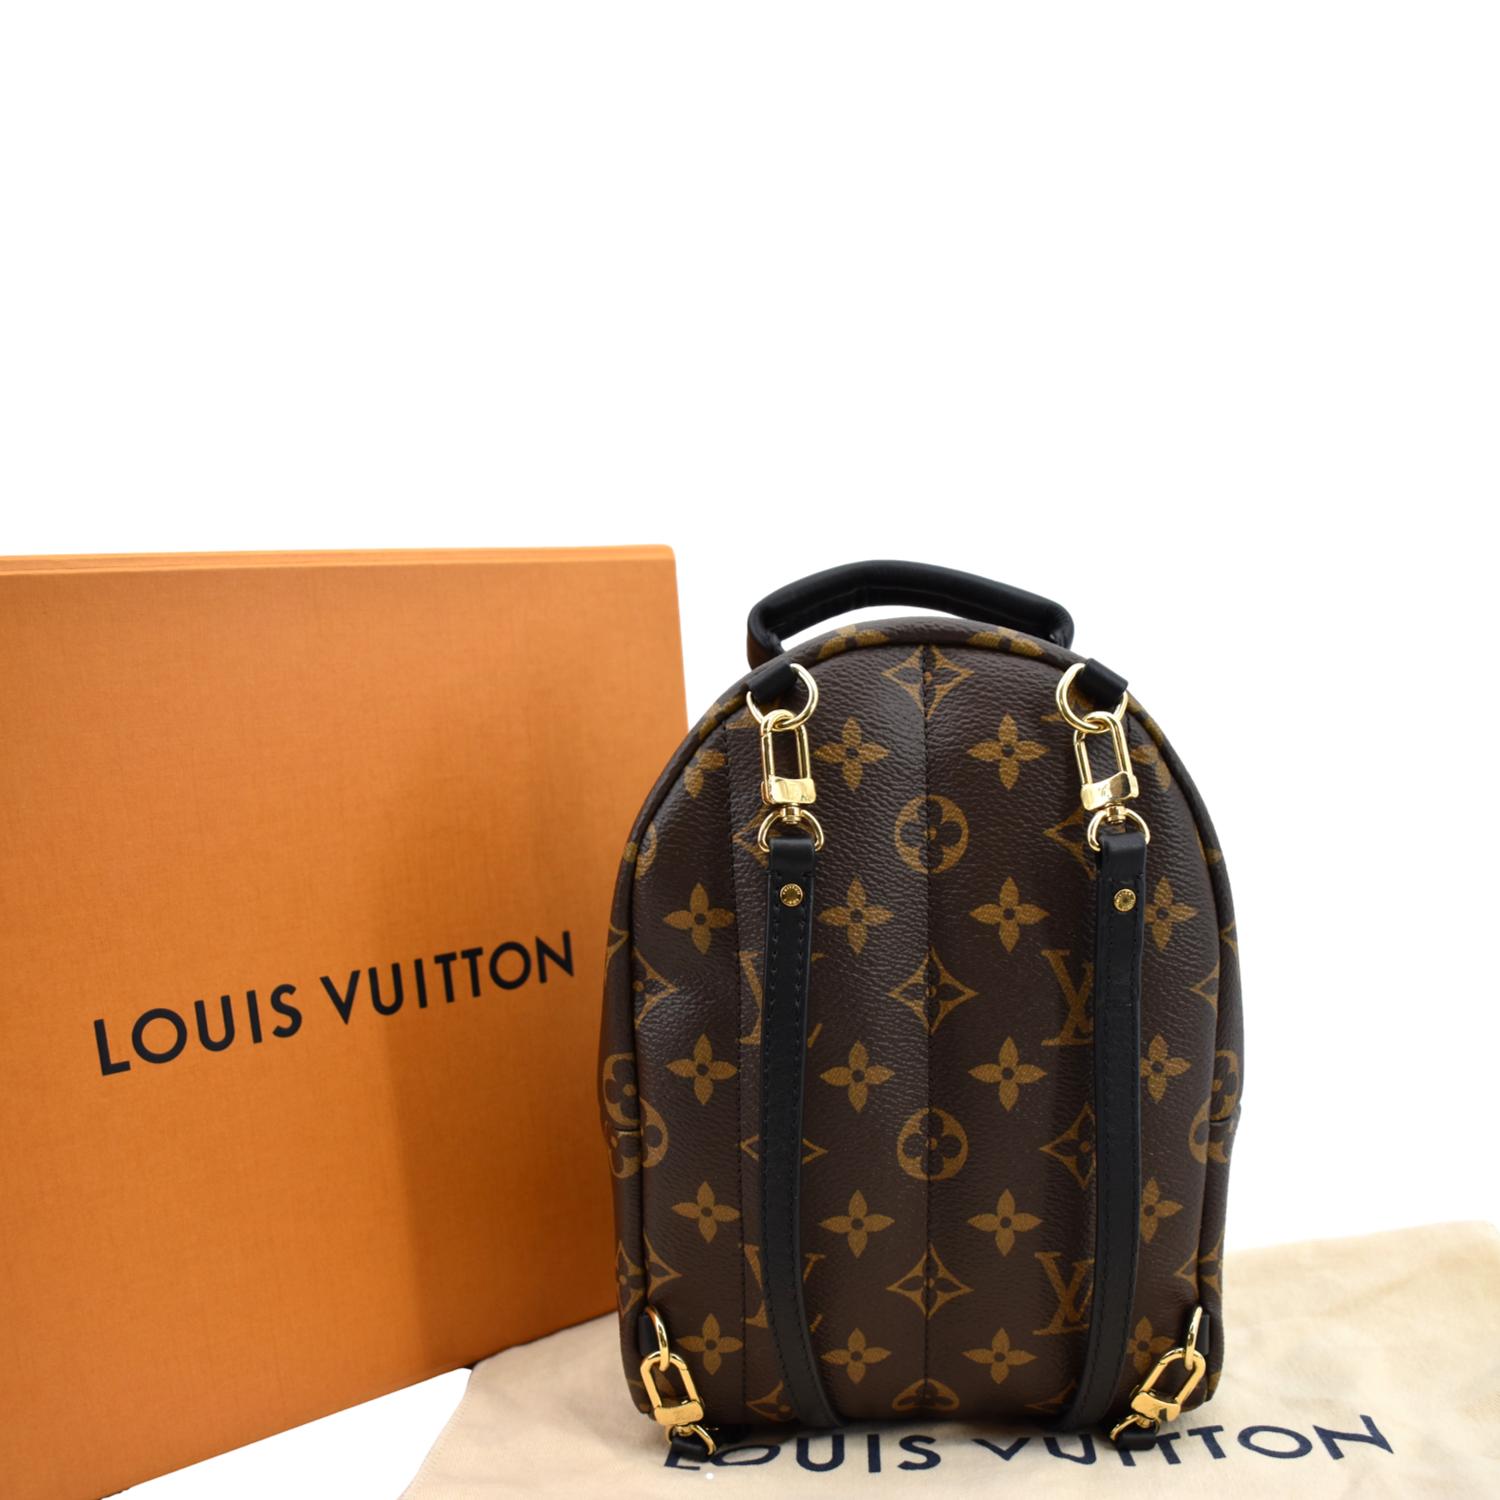 17 Ways To Wear Louis Vuitton Palm Springs Mini Backpack 